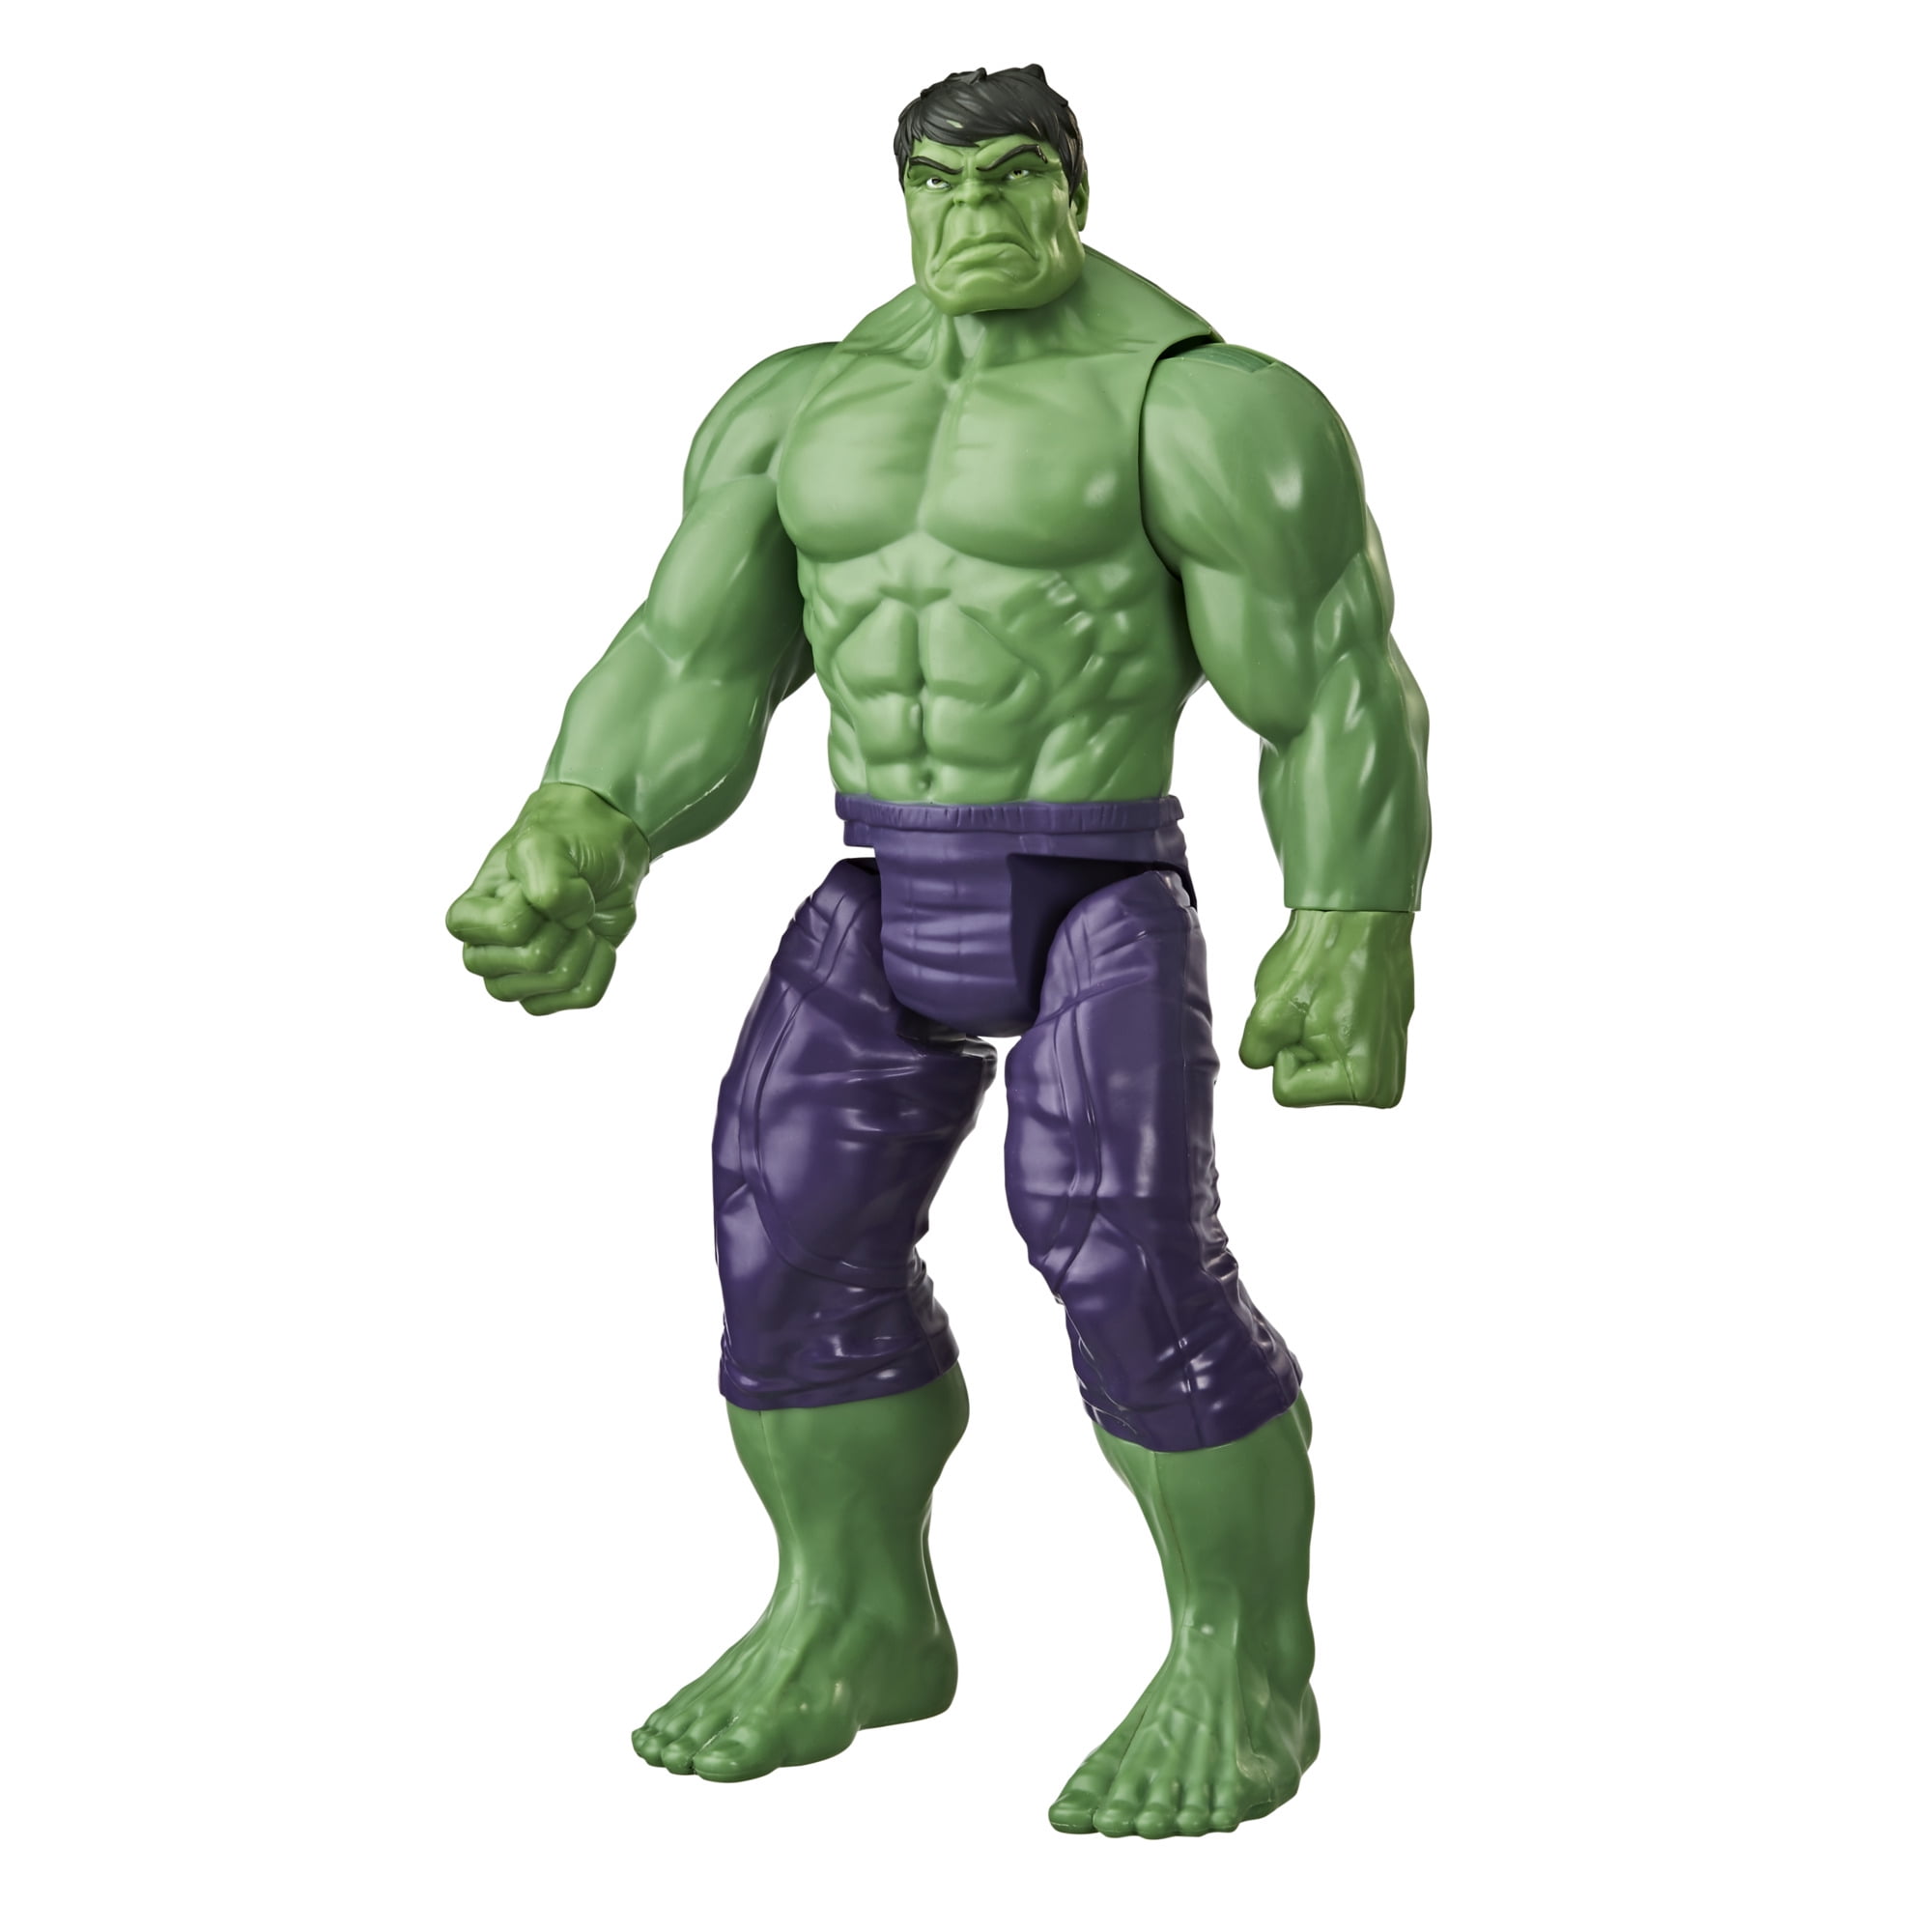 The Super Hero Green Hulk Action Figures for Boys & Kids Marvel’s Character TOY 